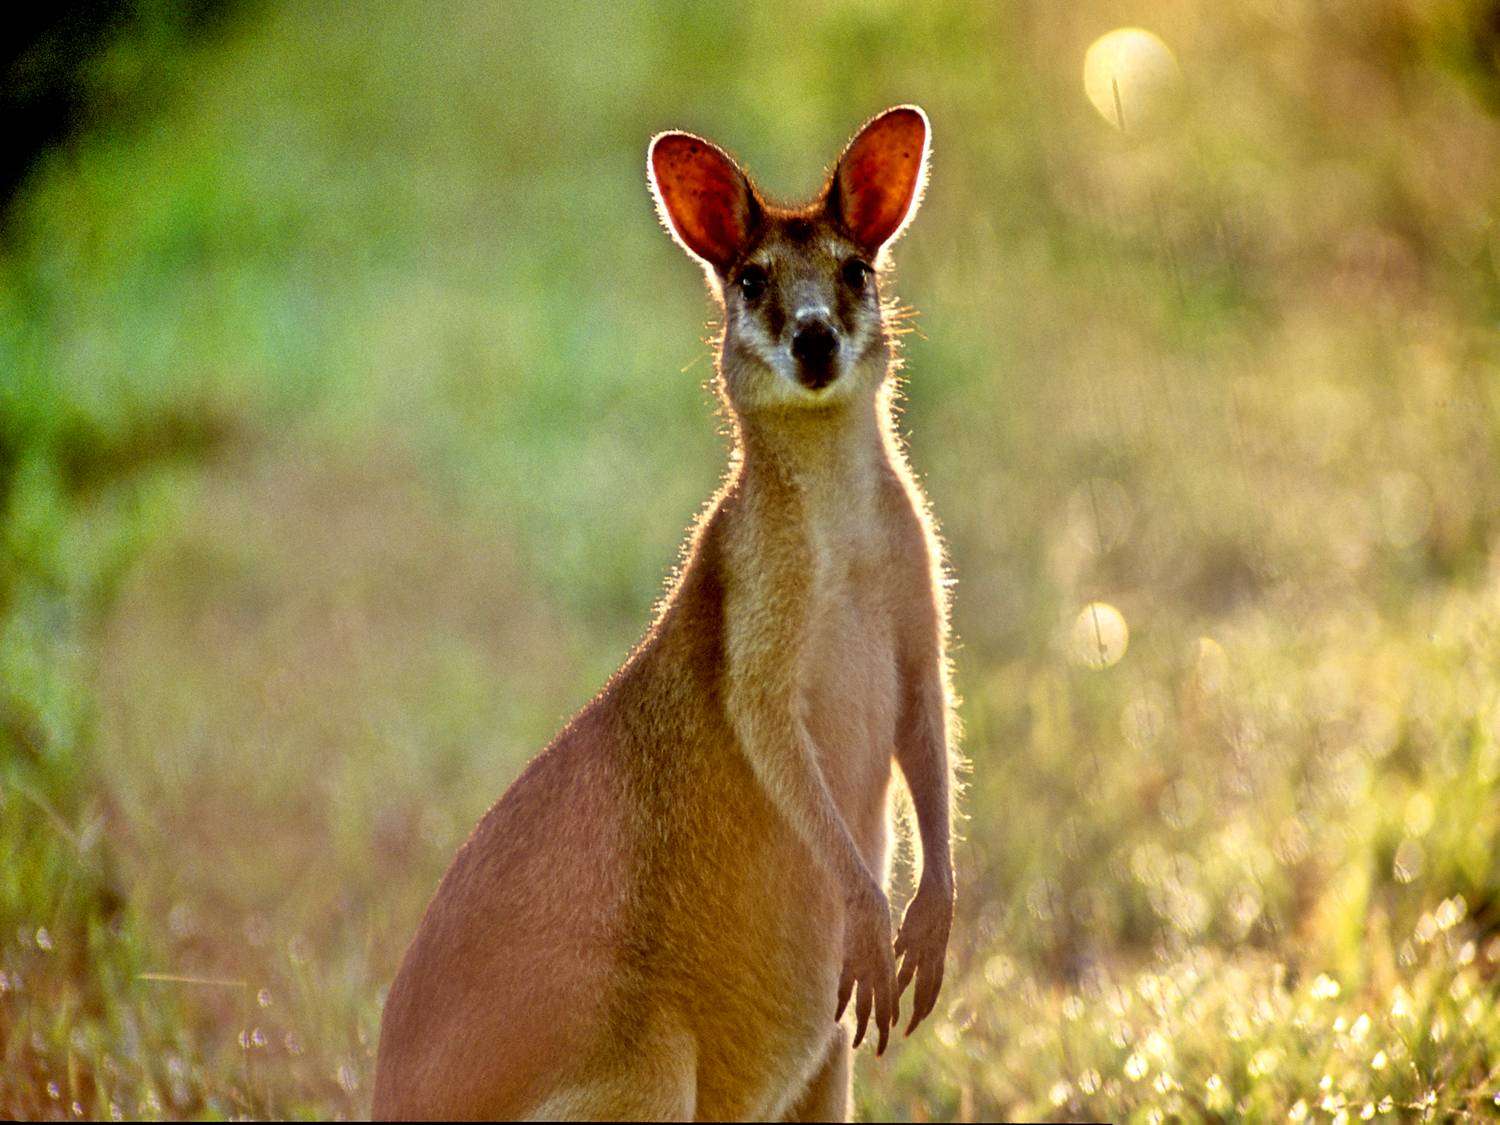 image of a wallaby